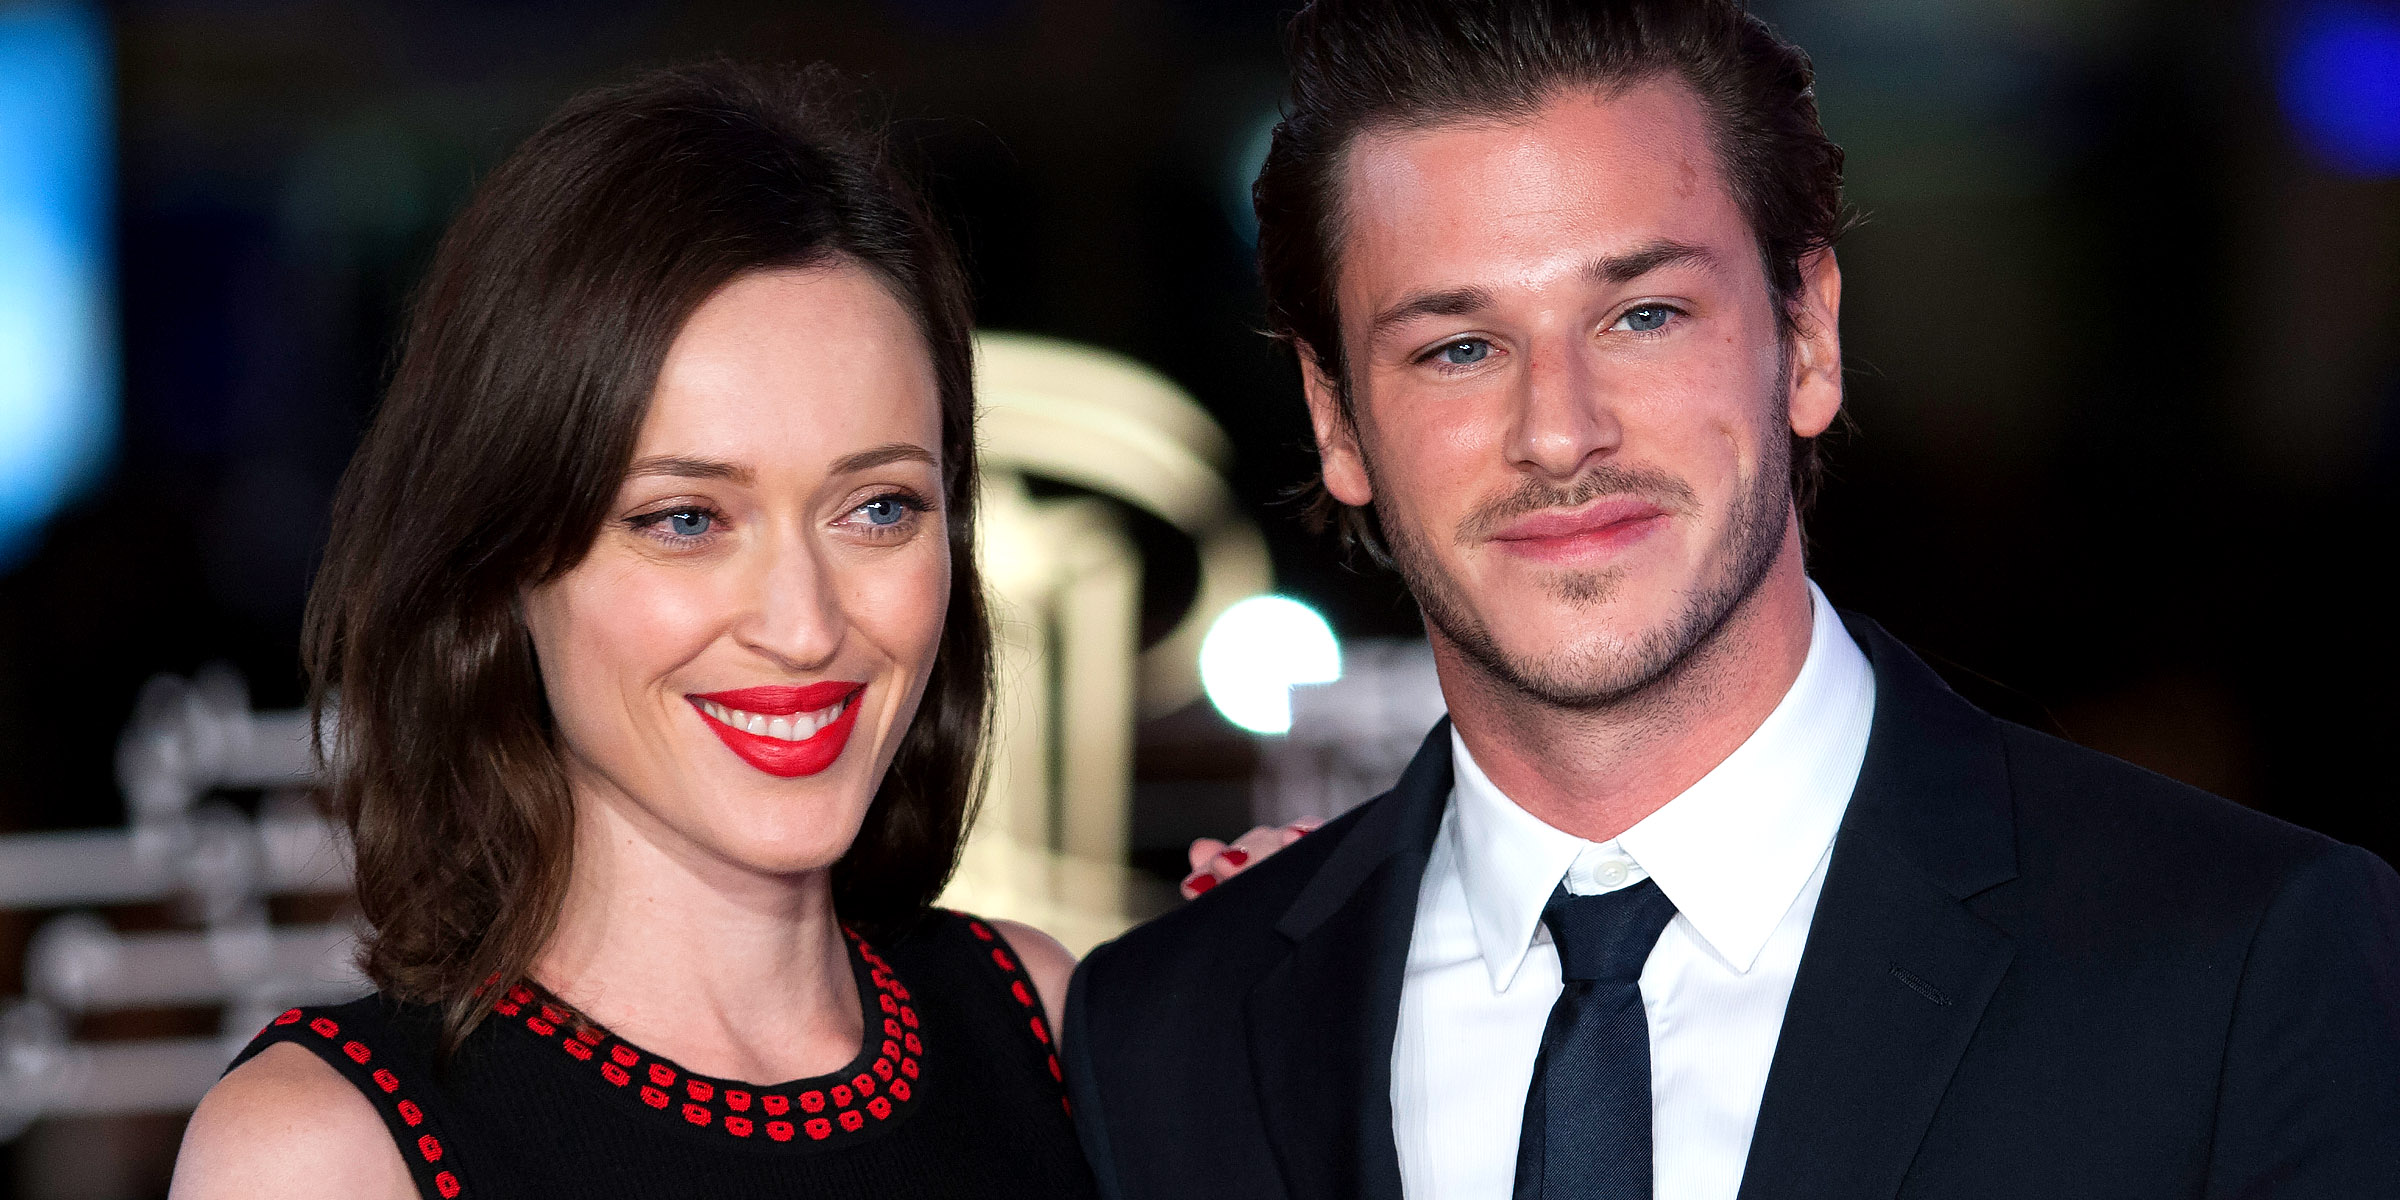 Gaëlle Piétri and Gaspard Ulliel. | Source: Getty Images